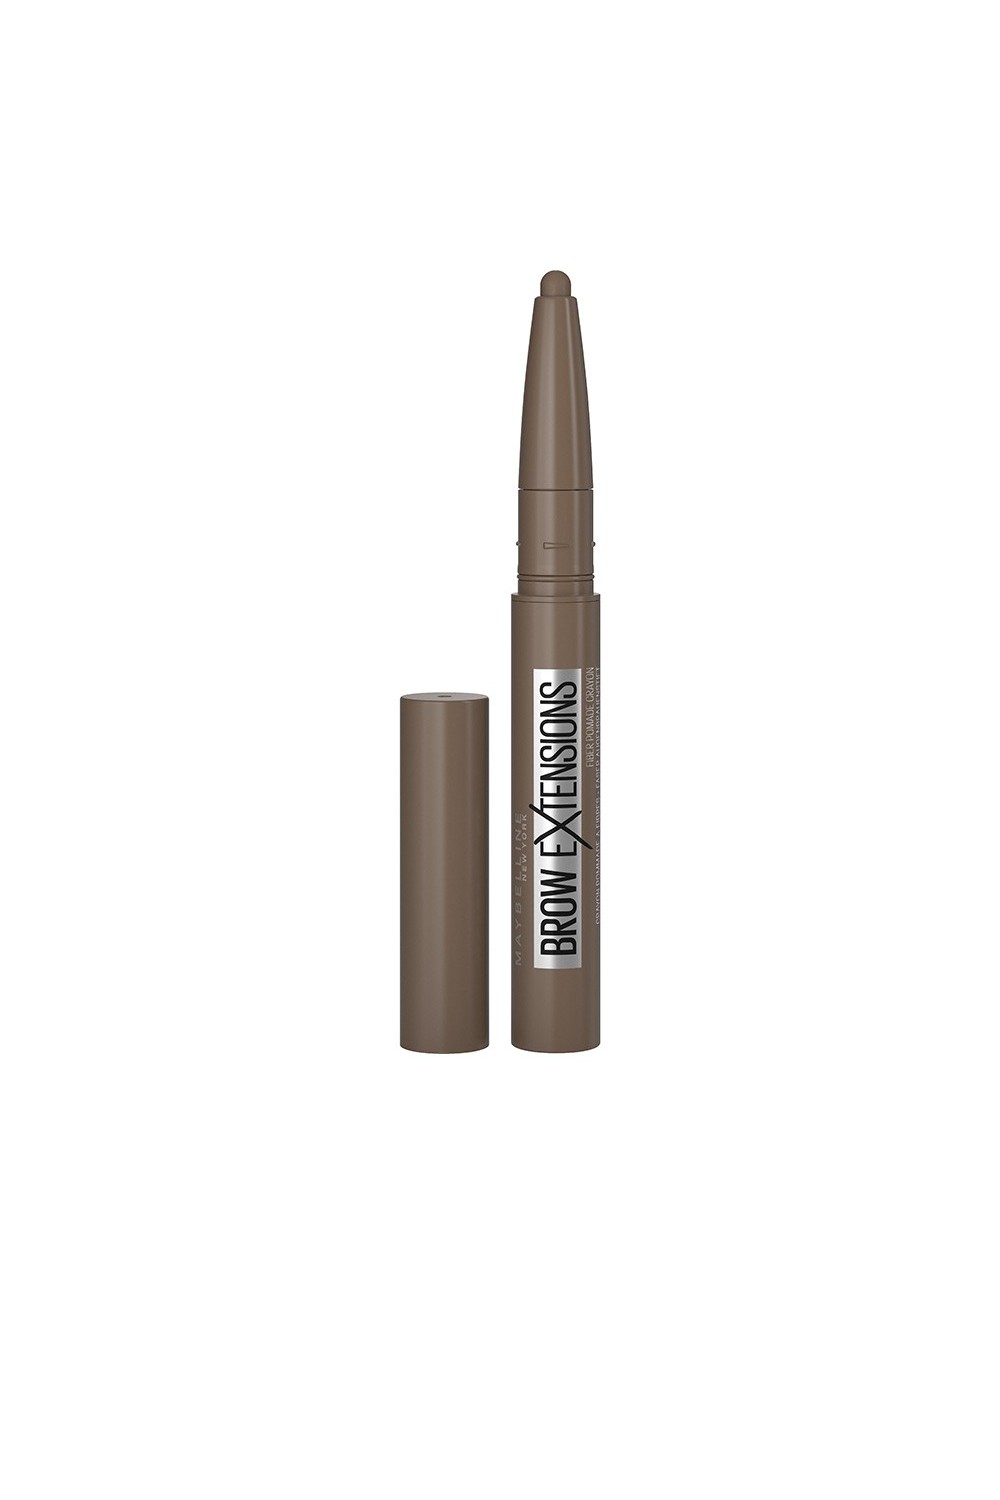 Maybelline Brow Extensions Stick 04 Medium Brown